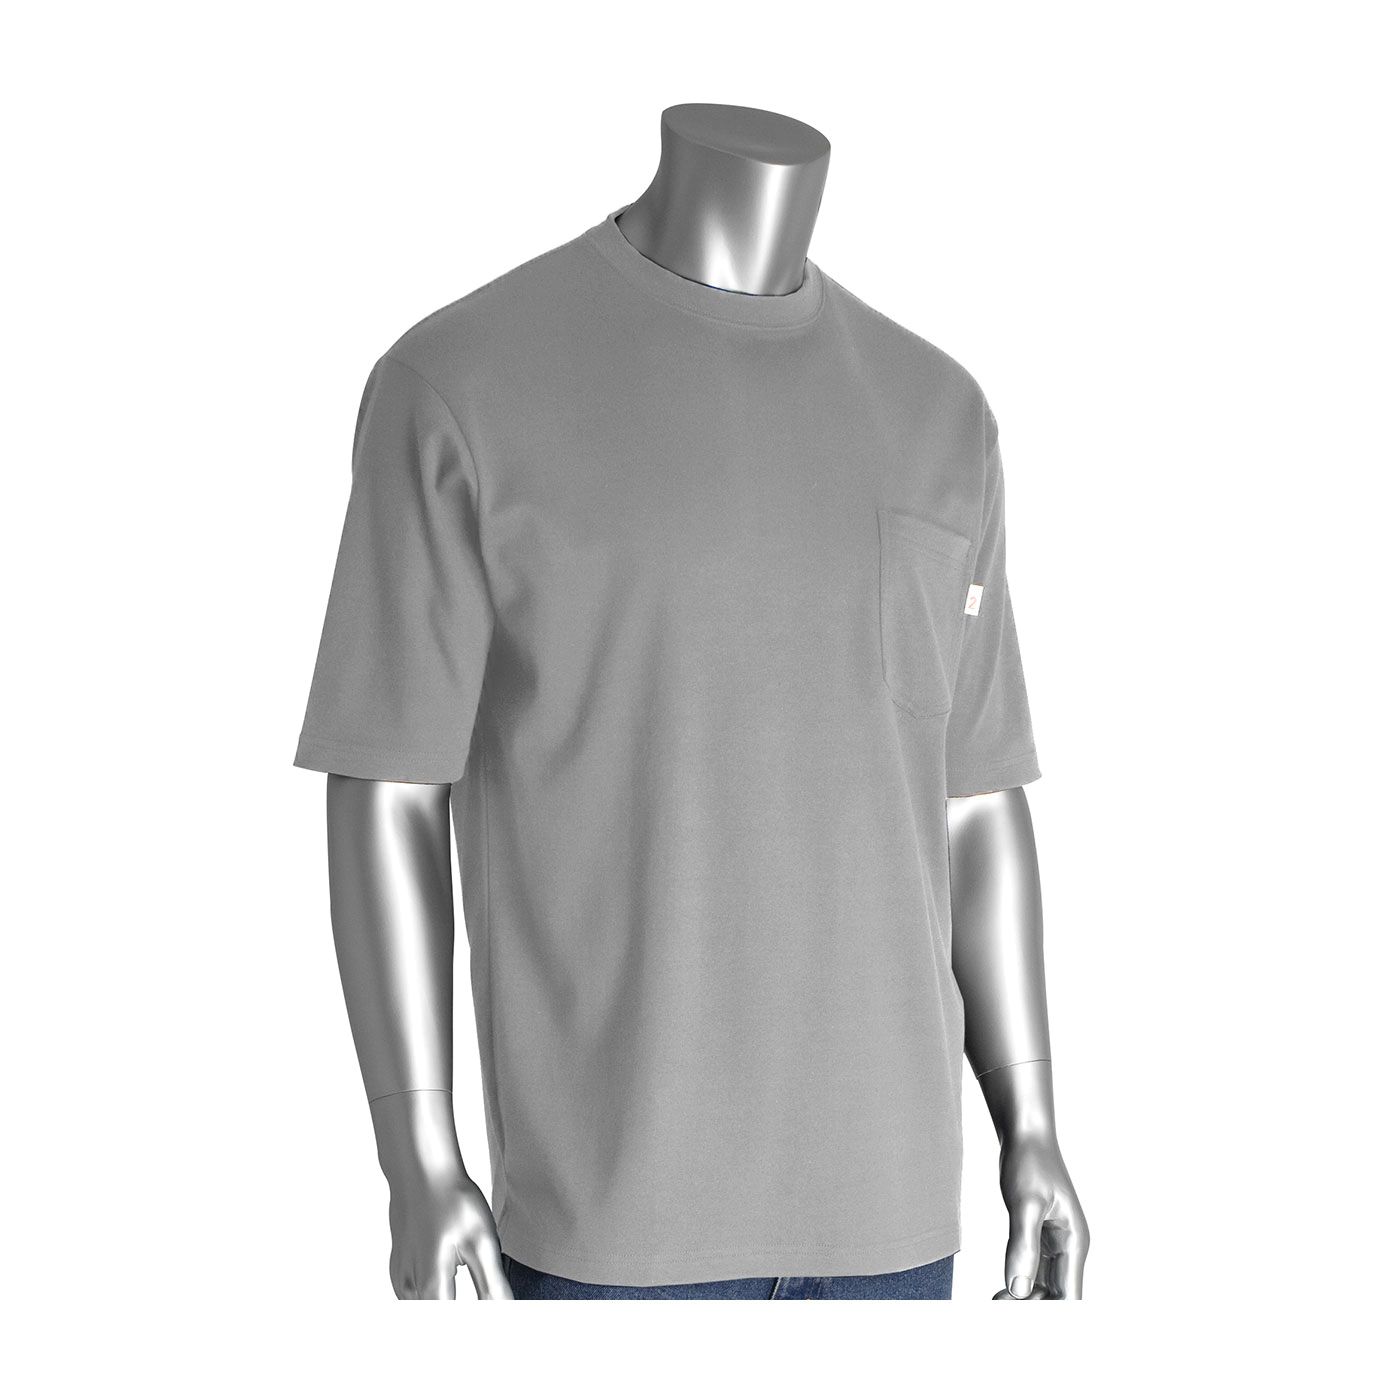 PIP® 385-FRSS-LG/3X Arc and Flame-Resistant Short Sleeve T-Shirt, 3XL, Light Gray, Cotton Interlock Knit, 35 in L